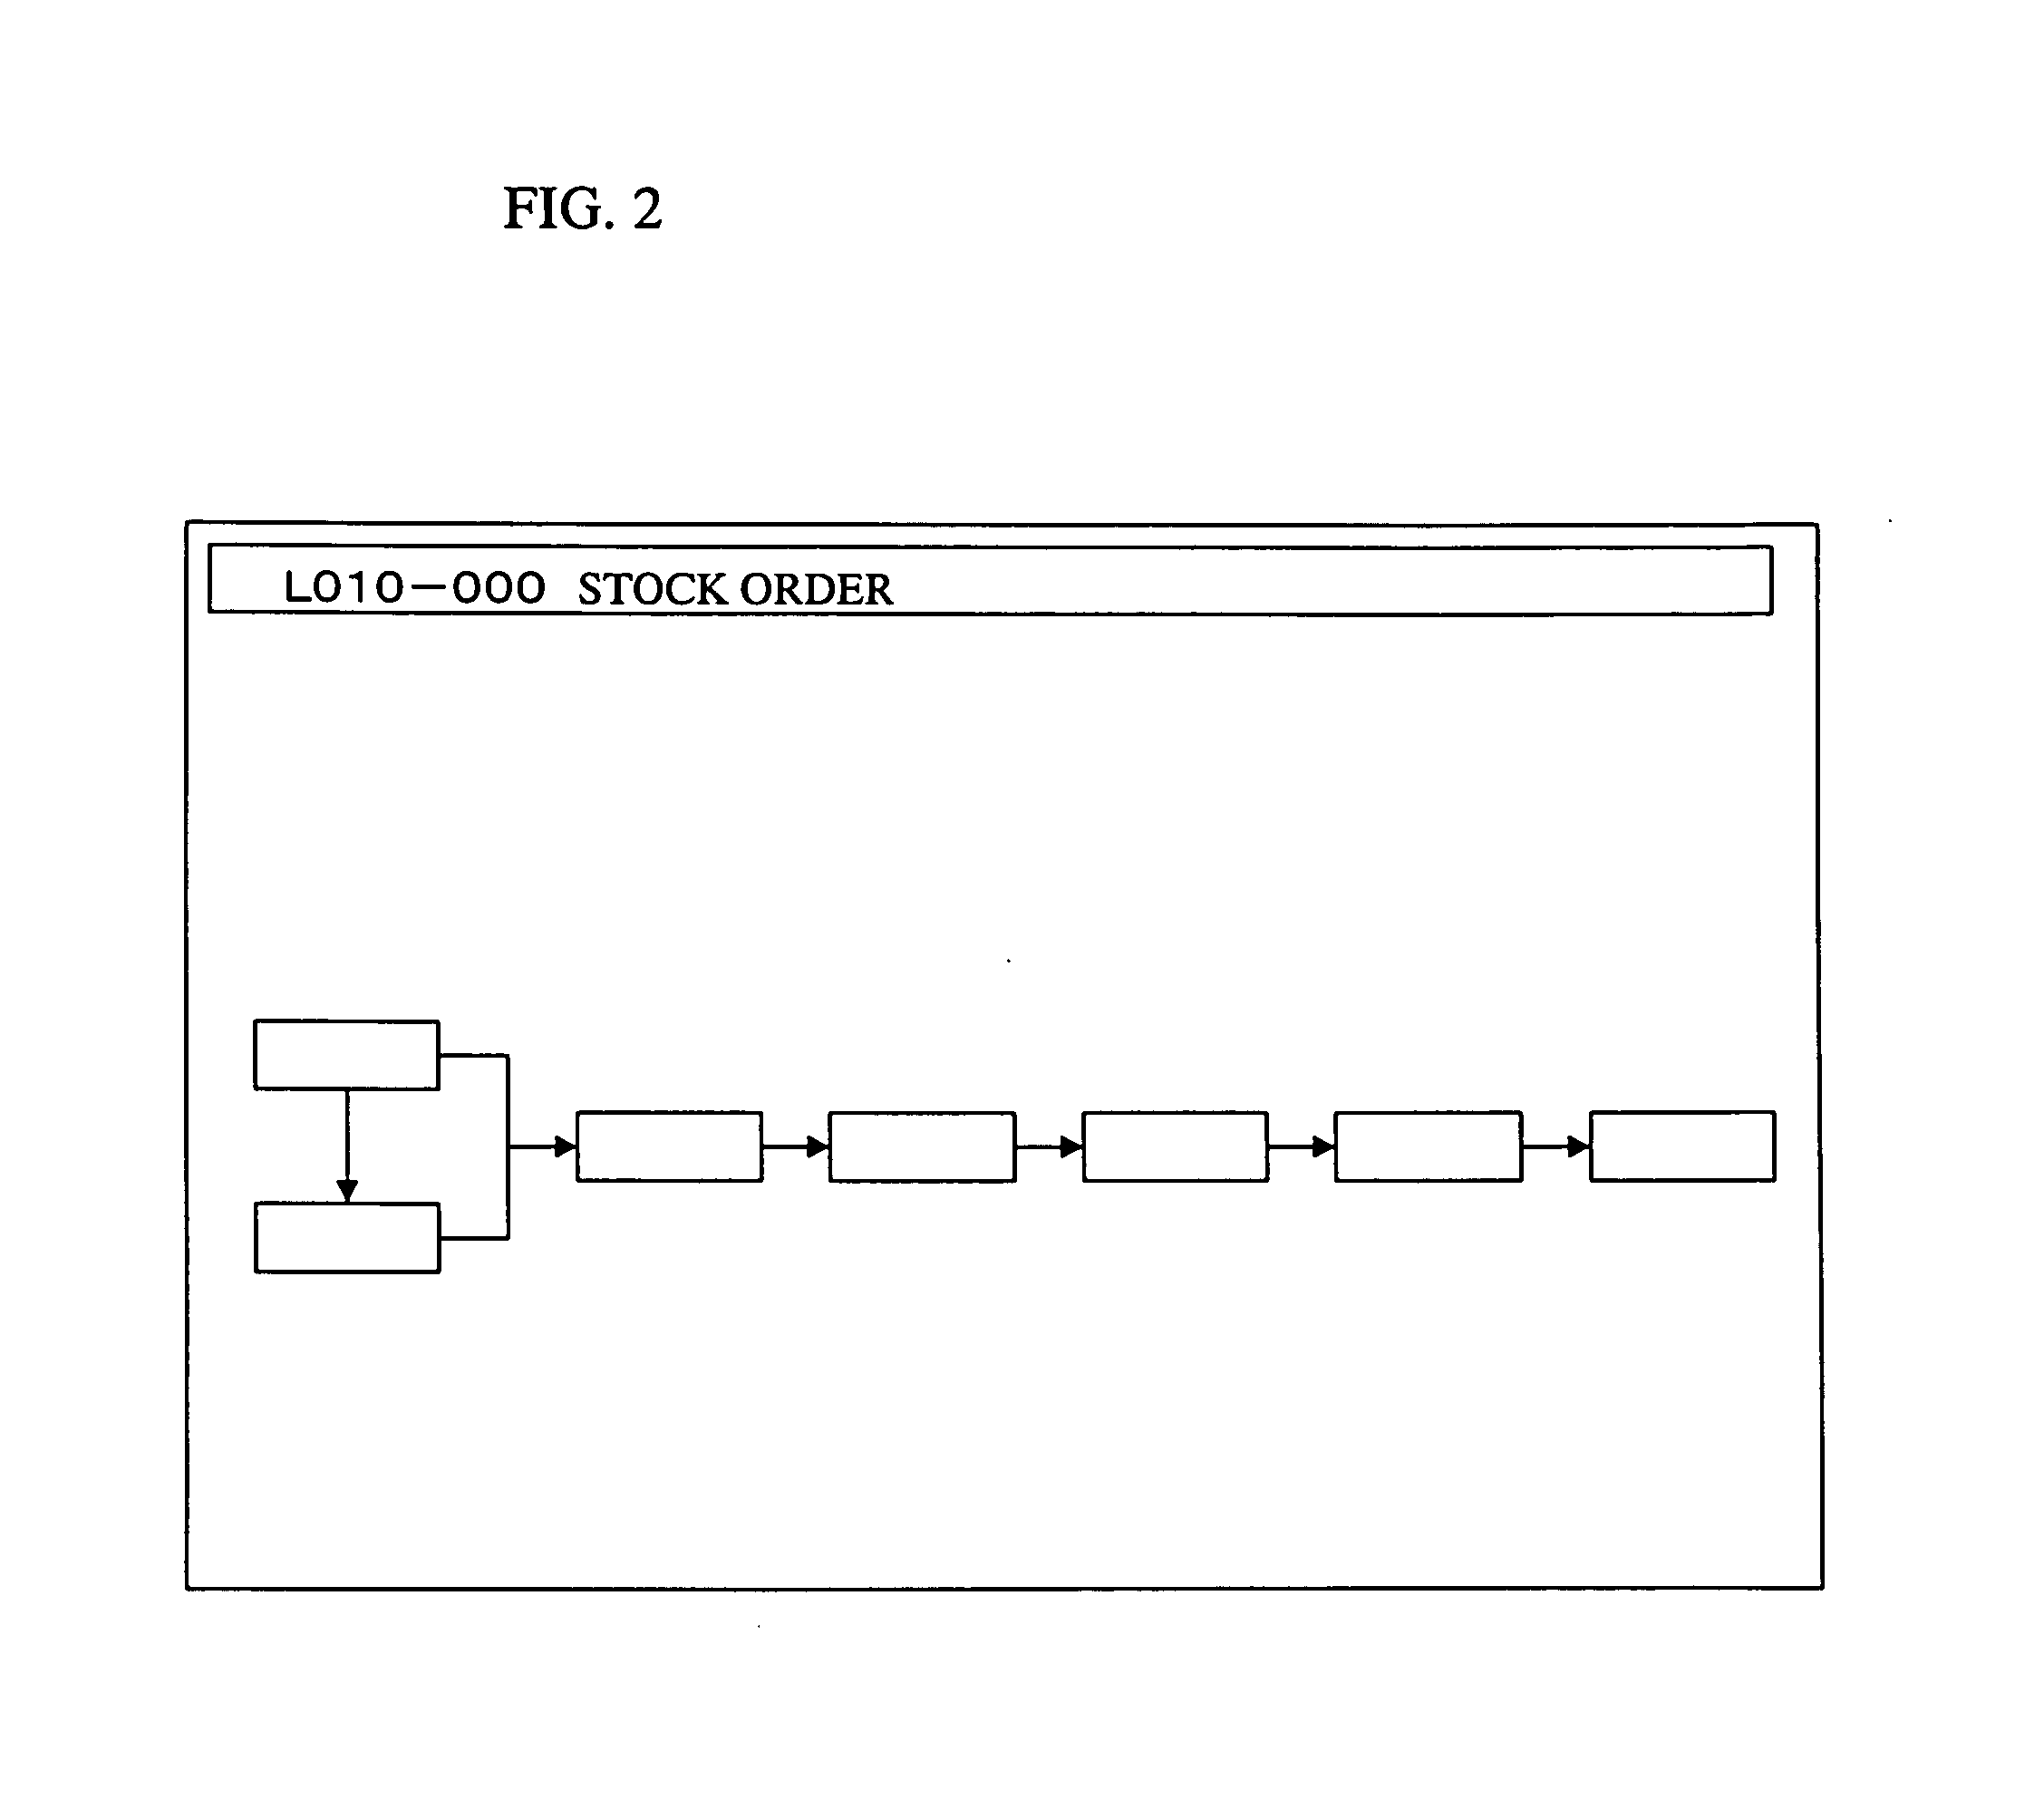 System for supporting introduction/operation of enterprise resource planning software